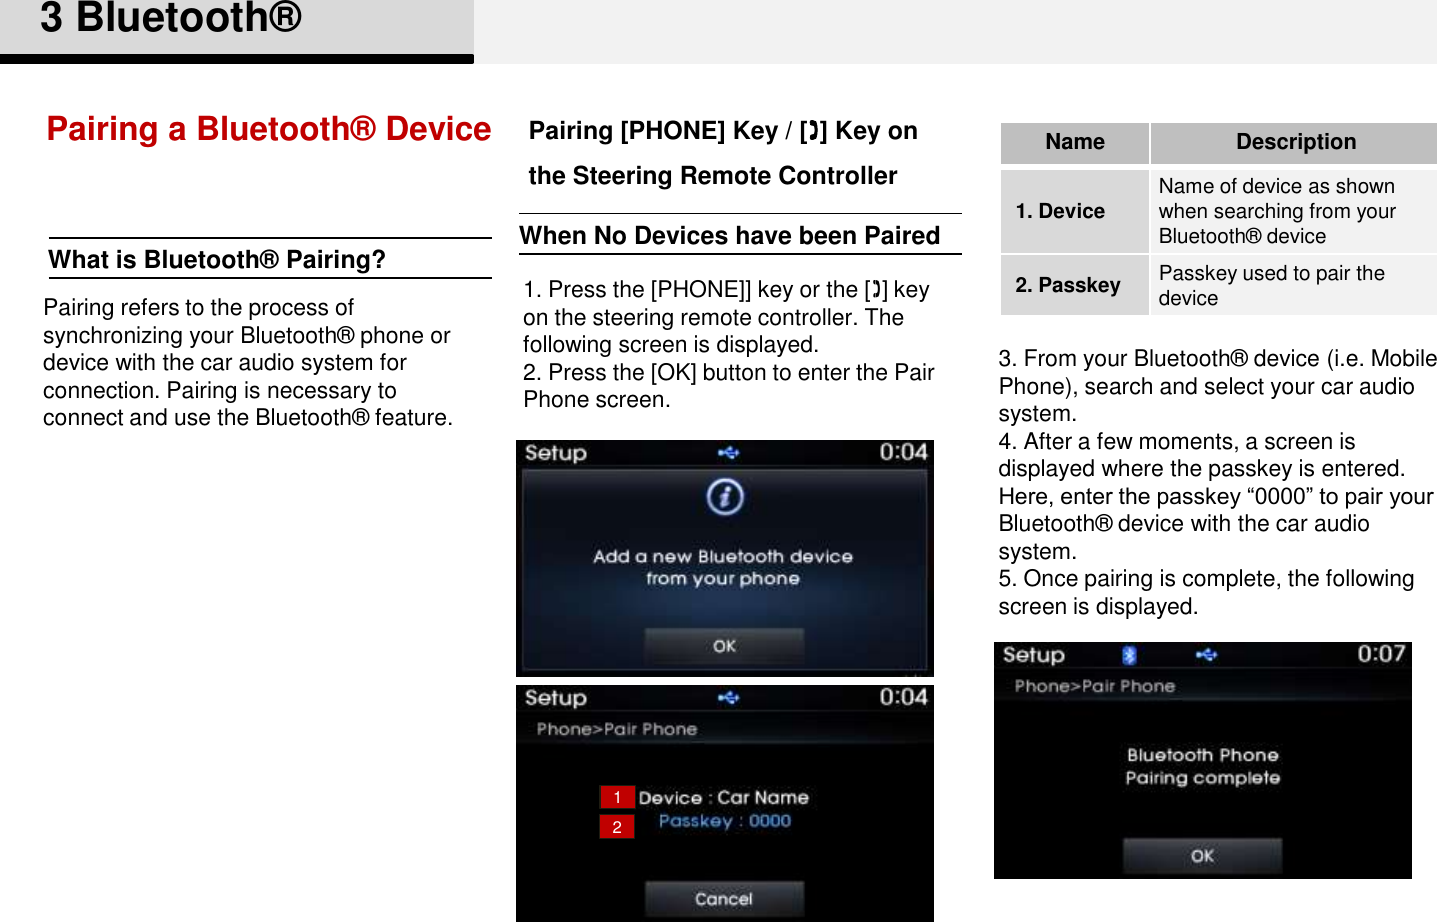 Pairing a Bluetooth®  Device1. Press the [PHONE]] key or the [] key on the steering remote controller. The following screen is displayed. 2. Press the [OK] button to enter the Pair Phone screen.3. From your Bluetooth®  device (i.e. Mobile Phone), search and select your car audio system. 4. After a few moments, a screen is displayed where the passkey is entered. Here, enter the passkey “0000” to pair your Bluetooth®  device with the car audio system. 5. Once pairing is complete, the following screen is displayed. 3 Bluetooth®12Pairing [PHONE] Key / [] Key on the Steering Remote ControllerNameDescription1. Device Name of device as shown when searching from your Bluetooth®  device2. Passkey Passkey used to pair the devicePairing refers to the process of synchronizing your Bluetooth®  phone or device with the car audio system for connection. Pairing is necessary to connect and use the Bluetooth®  feature.What is Bluetooth®  Pairing? When No Devices have been Paired